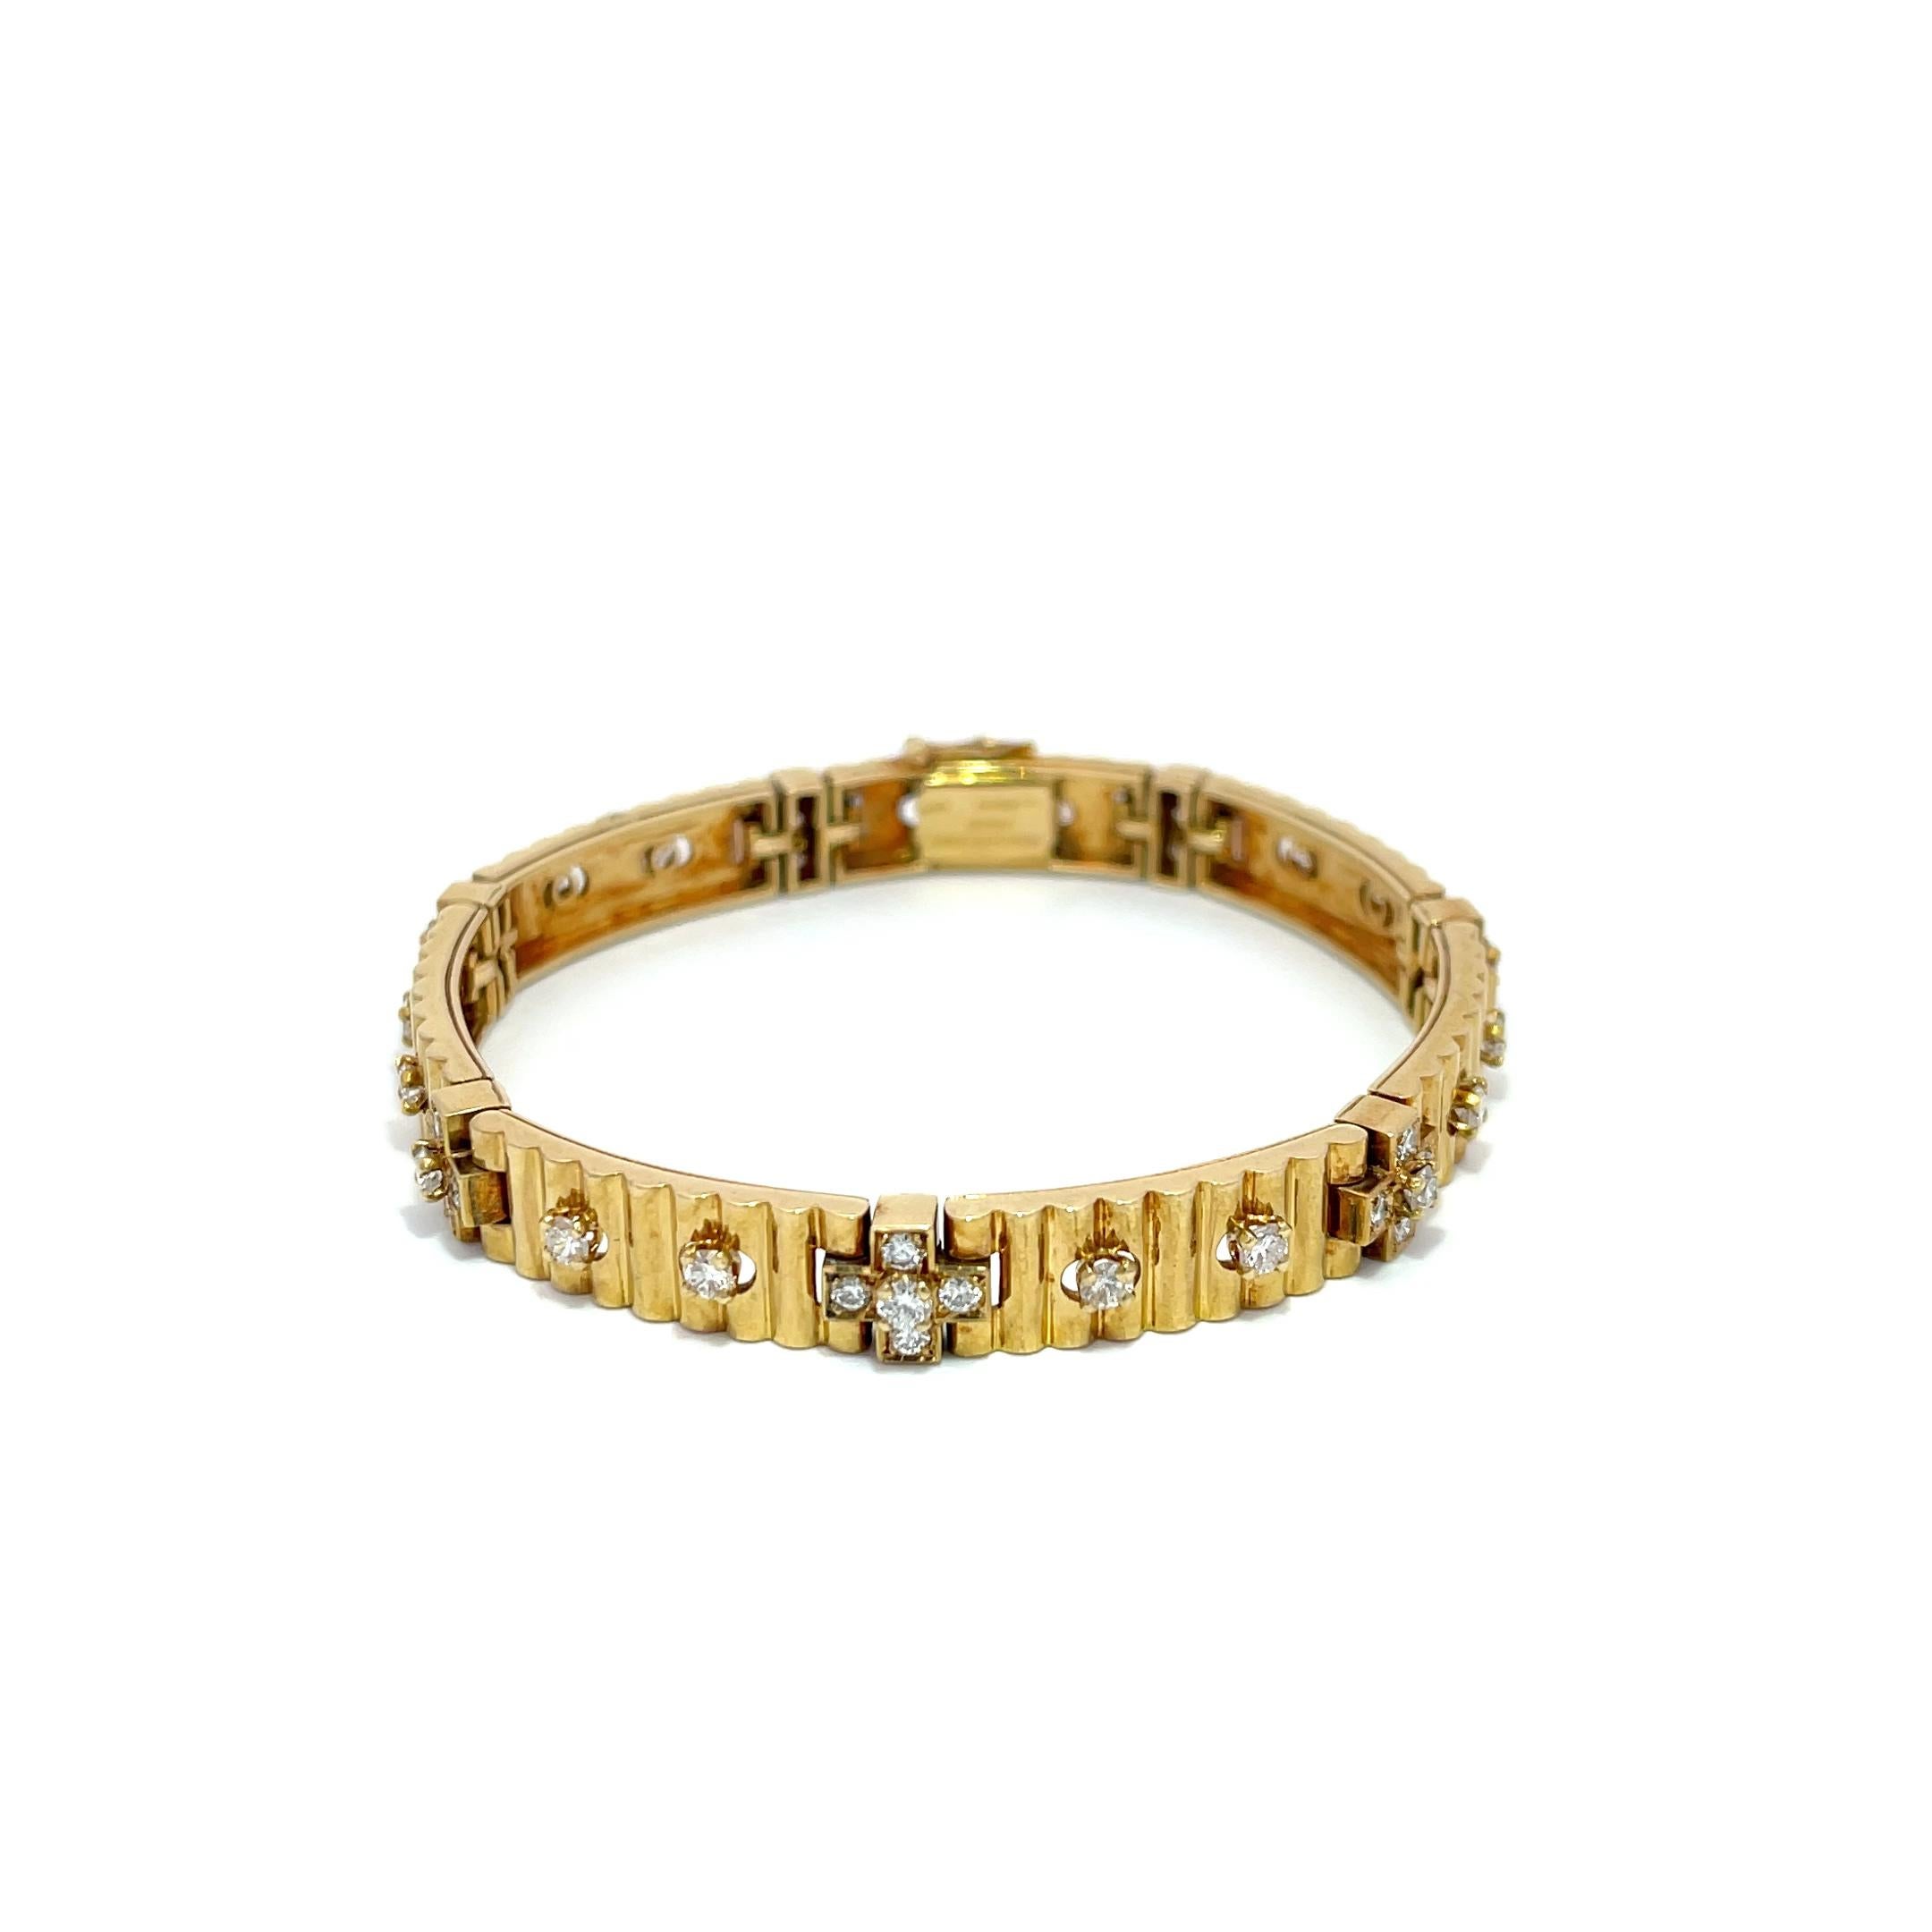 Mauboussin Diamond Link Bracelet 18K Yellow Gold In Good Condition For Sale In Dallas, TX